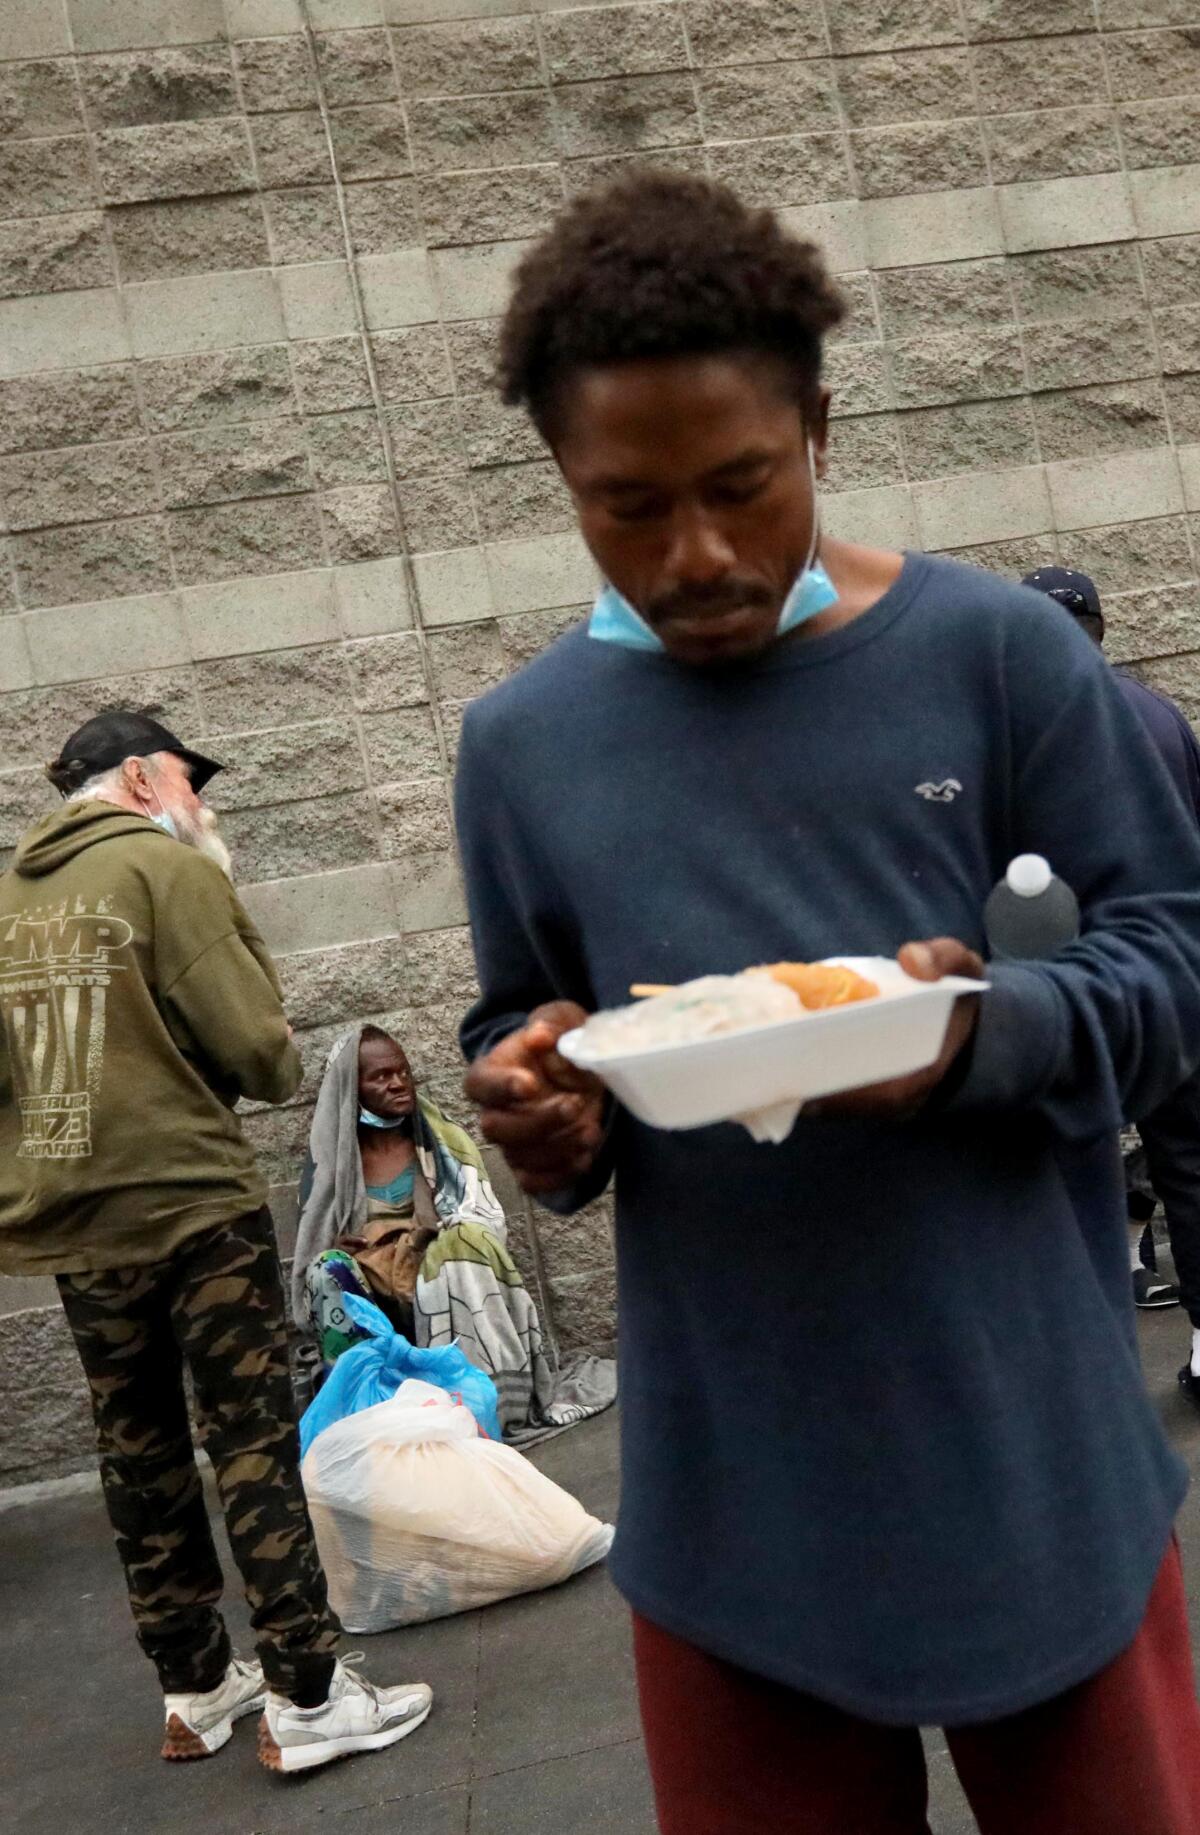 A homeless man prepares to eat his breakfast in a container while standing on the sidewalk.